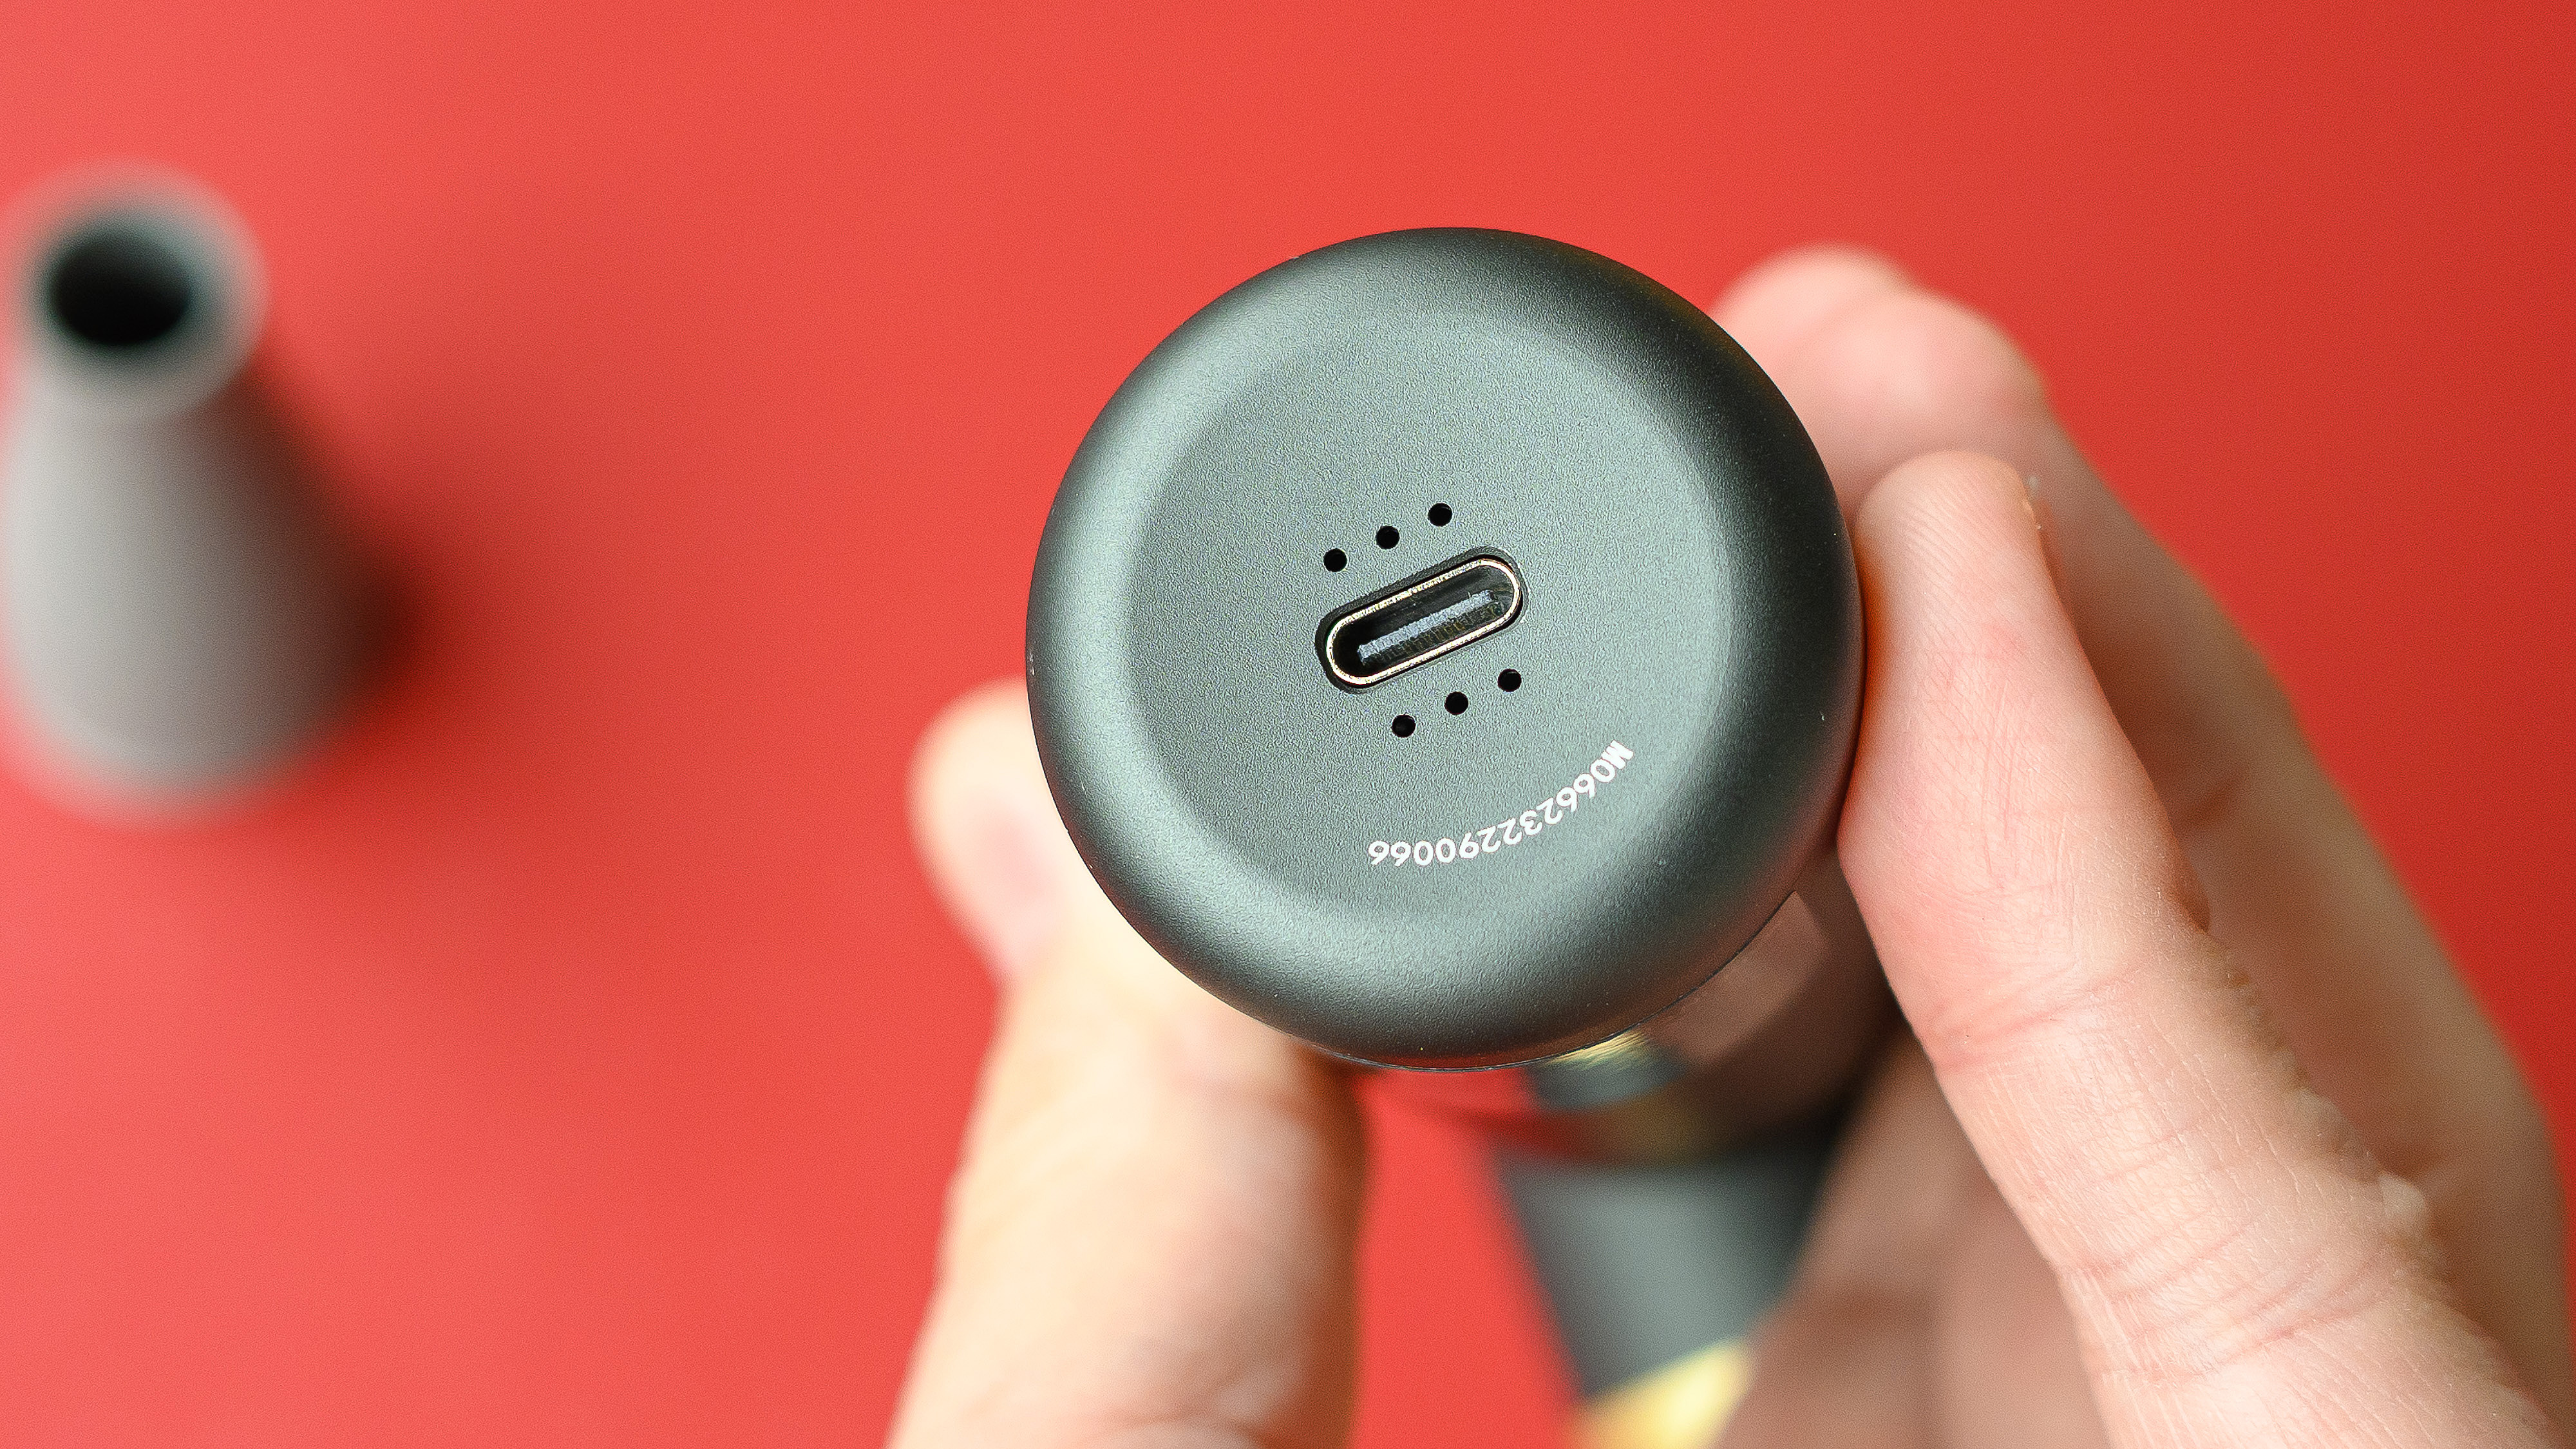 The bottom of the Kica Jet Fan 2 reveals the USB-C charging port.